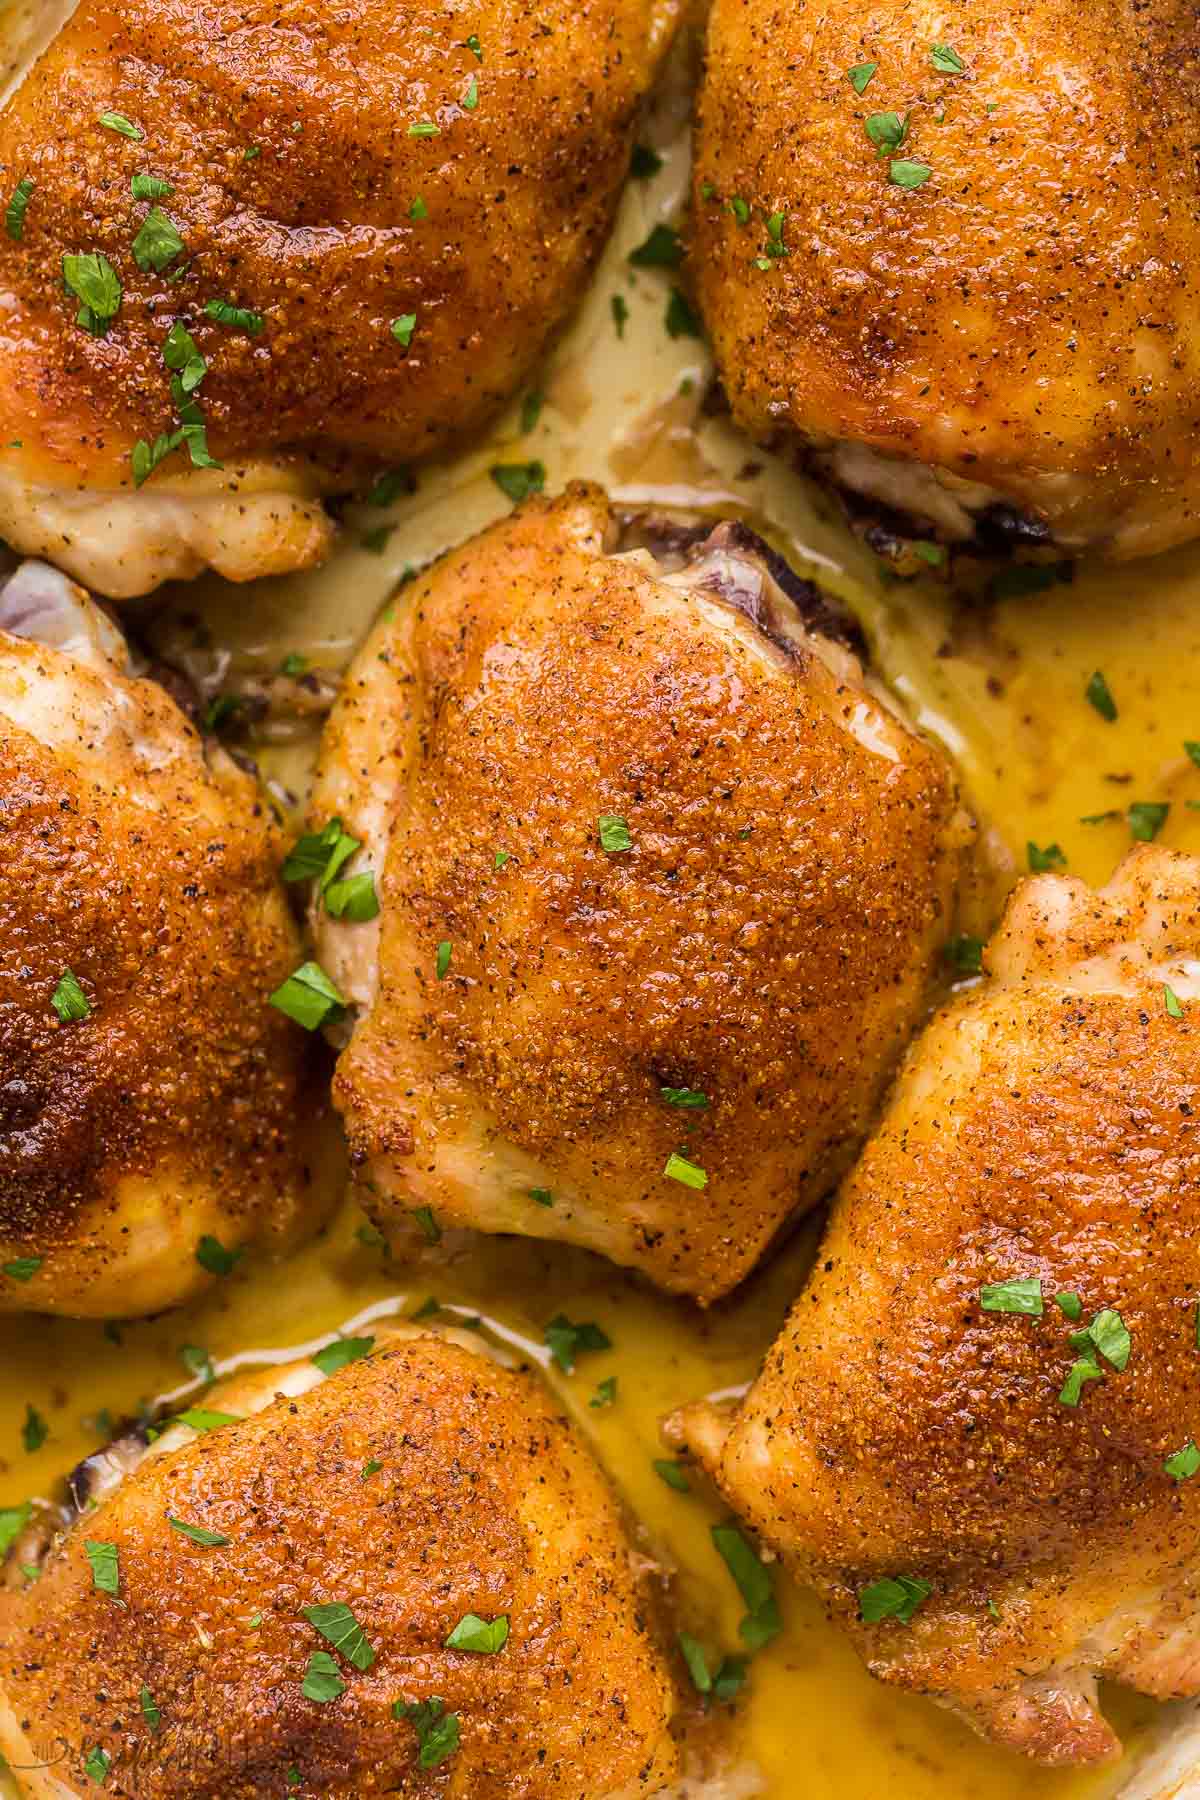 very close up image of a baked chicken thigh